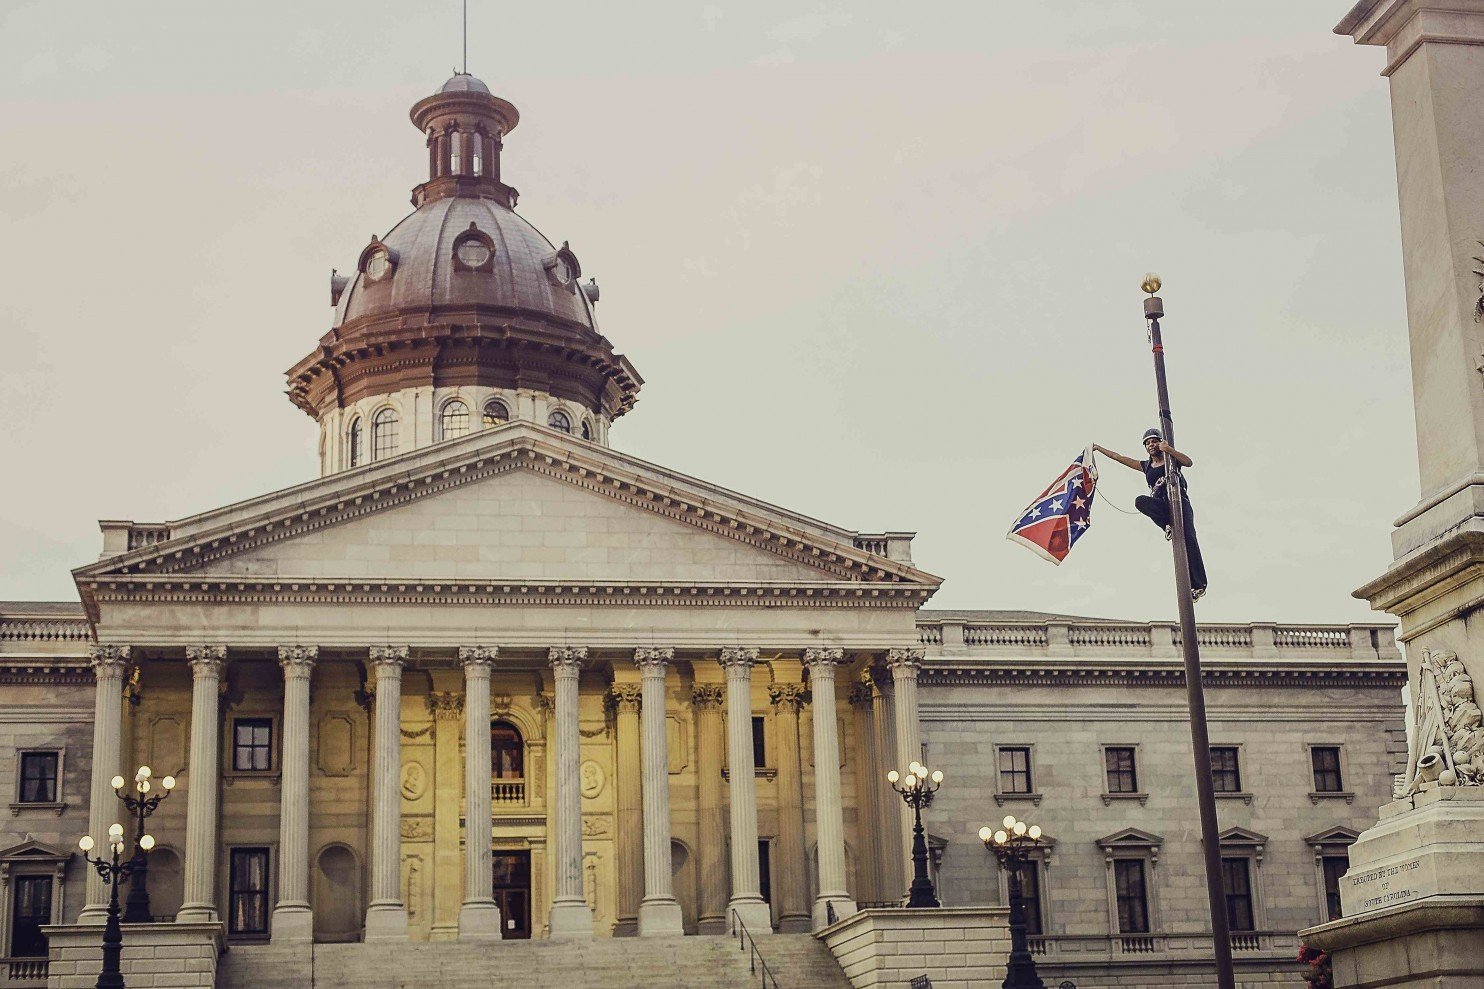 Bree Newsome, Who Pulled Down S.C. Confederate Flag in 2015 ...